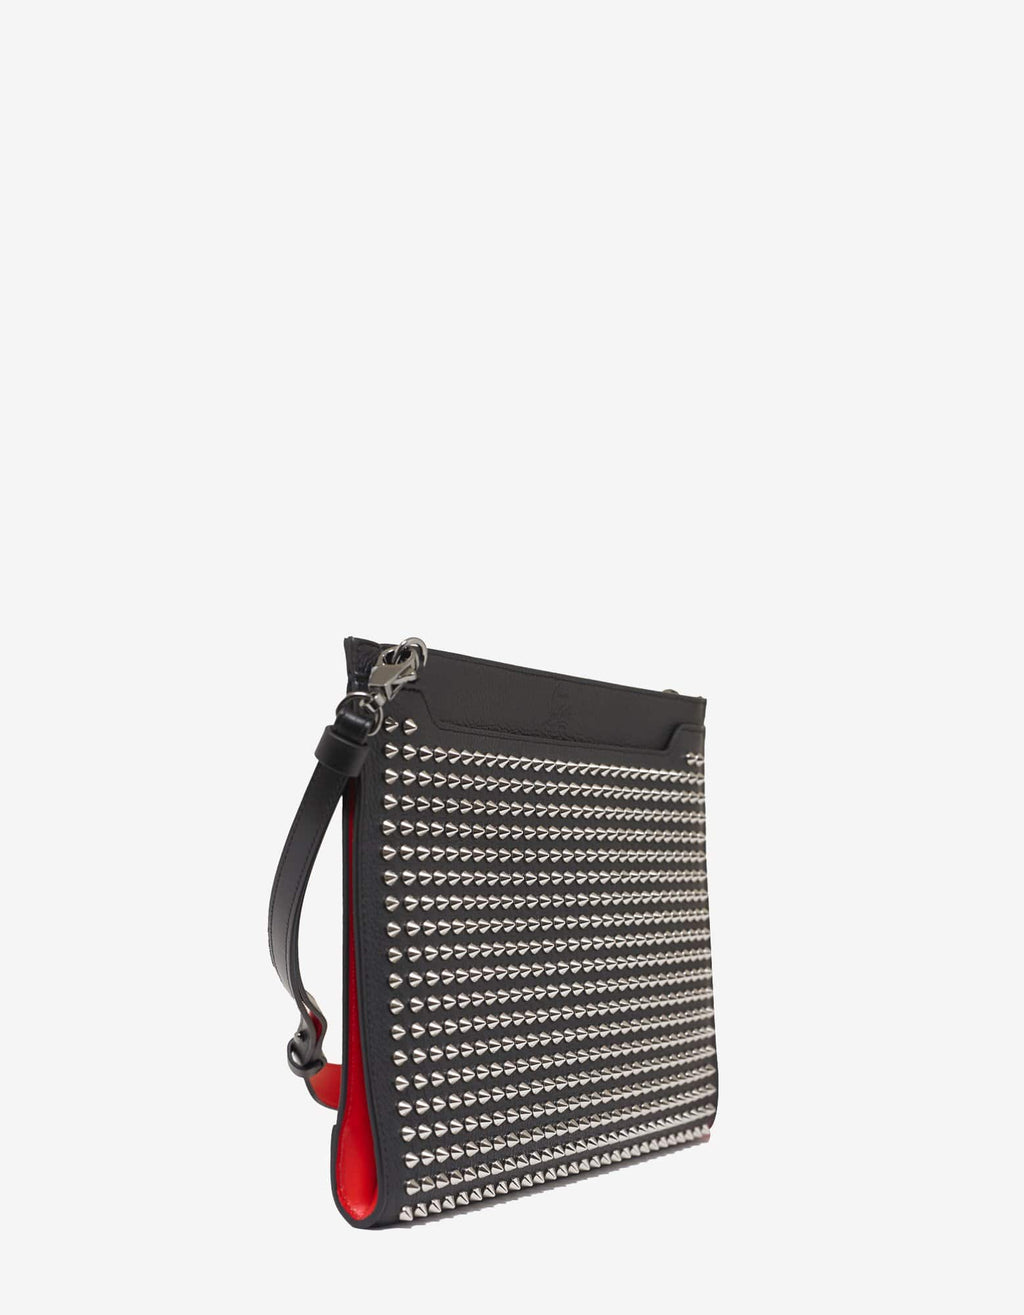 Christian Louboutin Skypouch Black Leather Bag with Silver Spikes